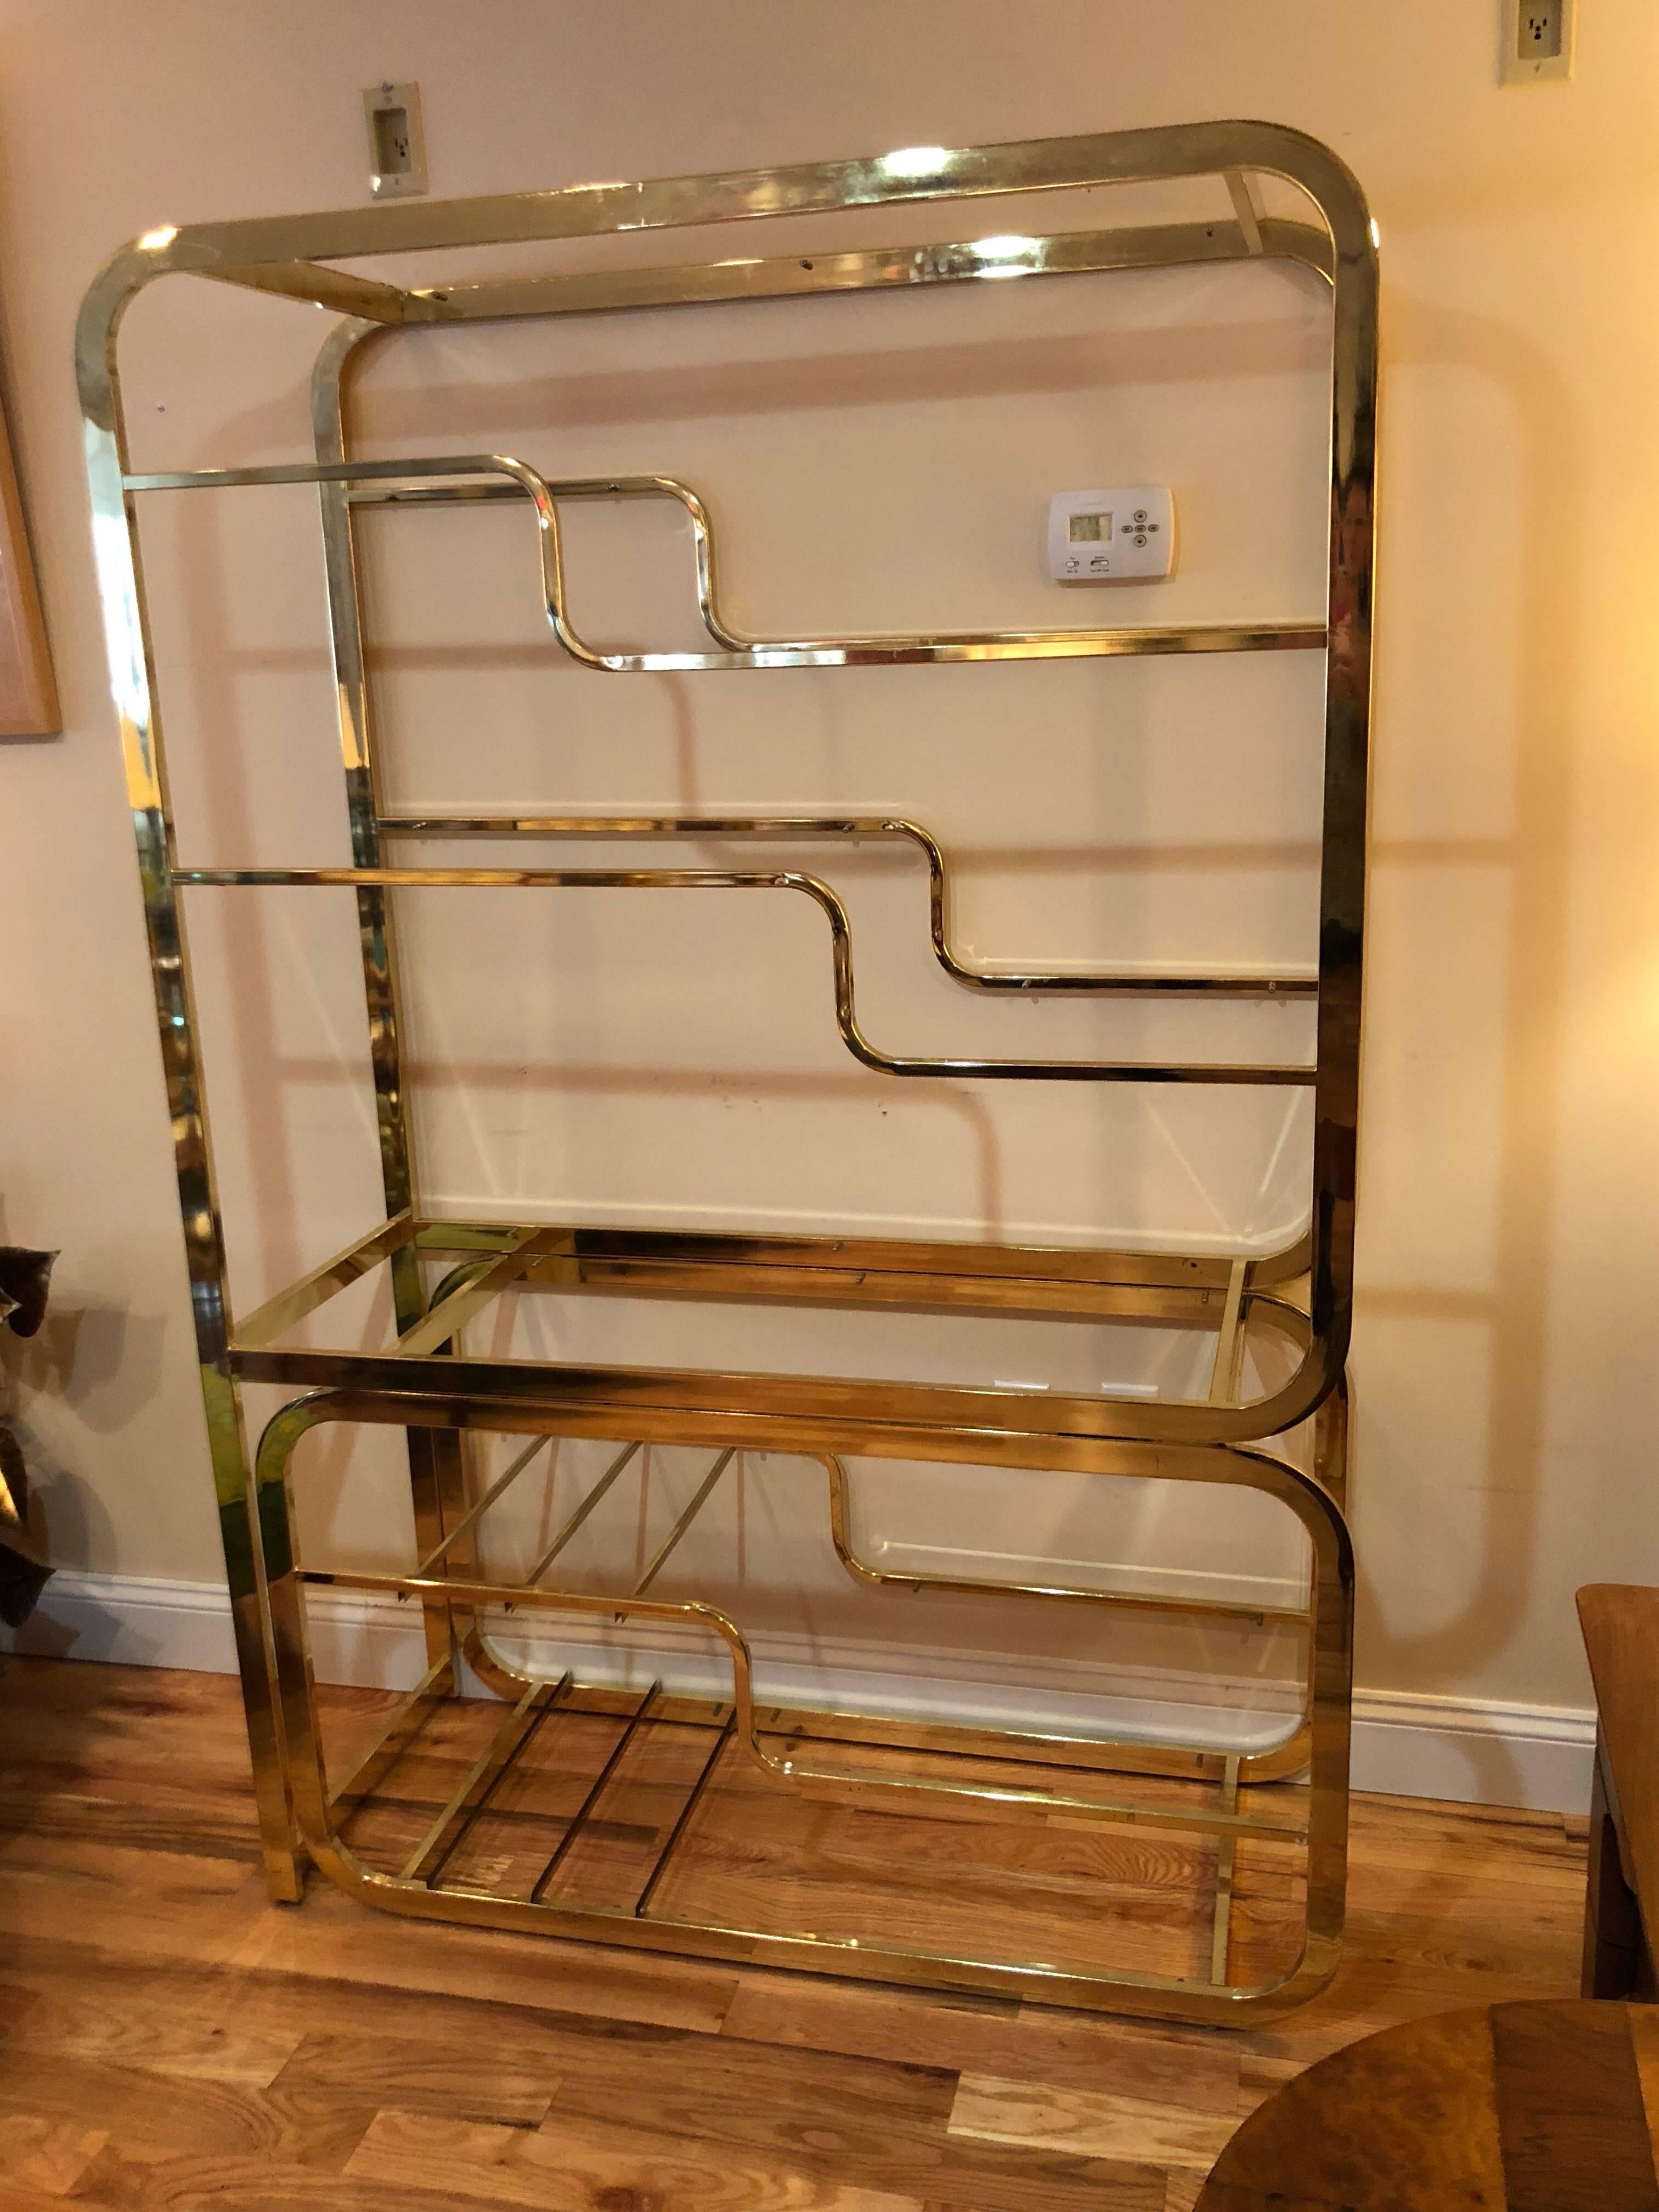 Milo Baughman Design Institute of America brass and glass étagère. Glass shelves line this brass geometric beauty. Lower adjustable section can extend out from 48